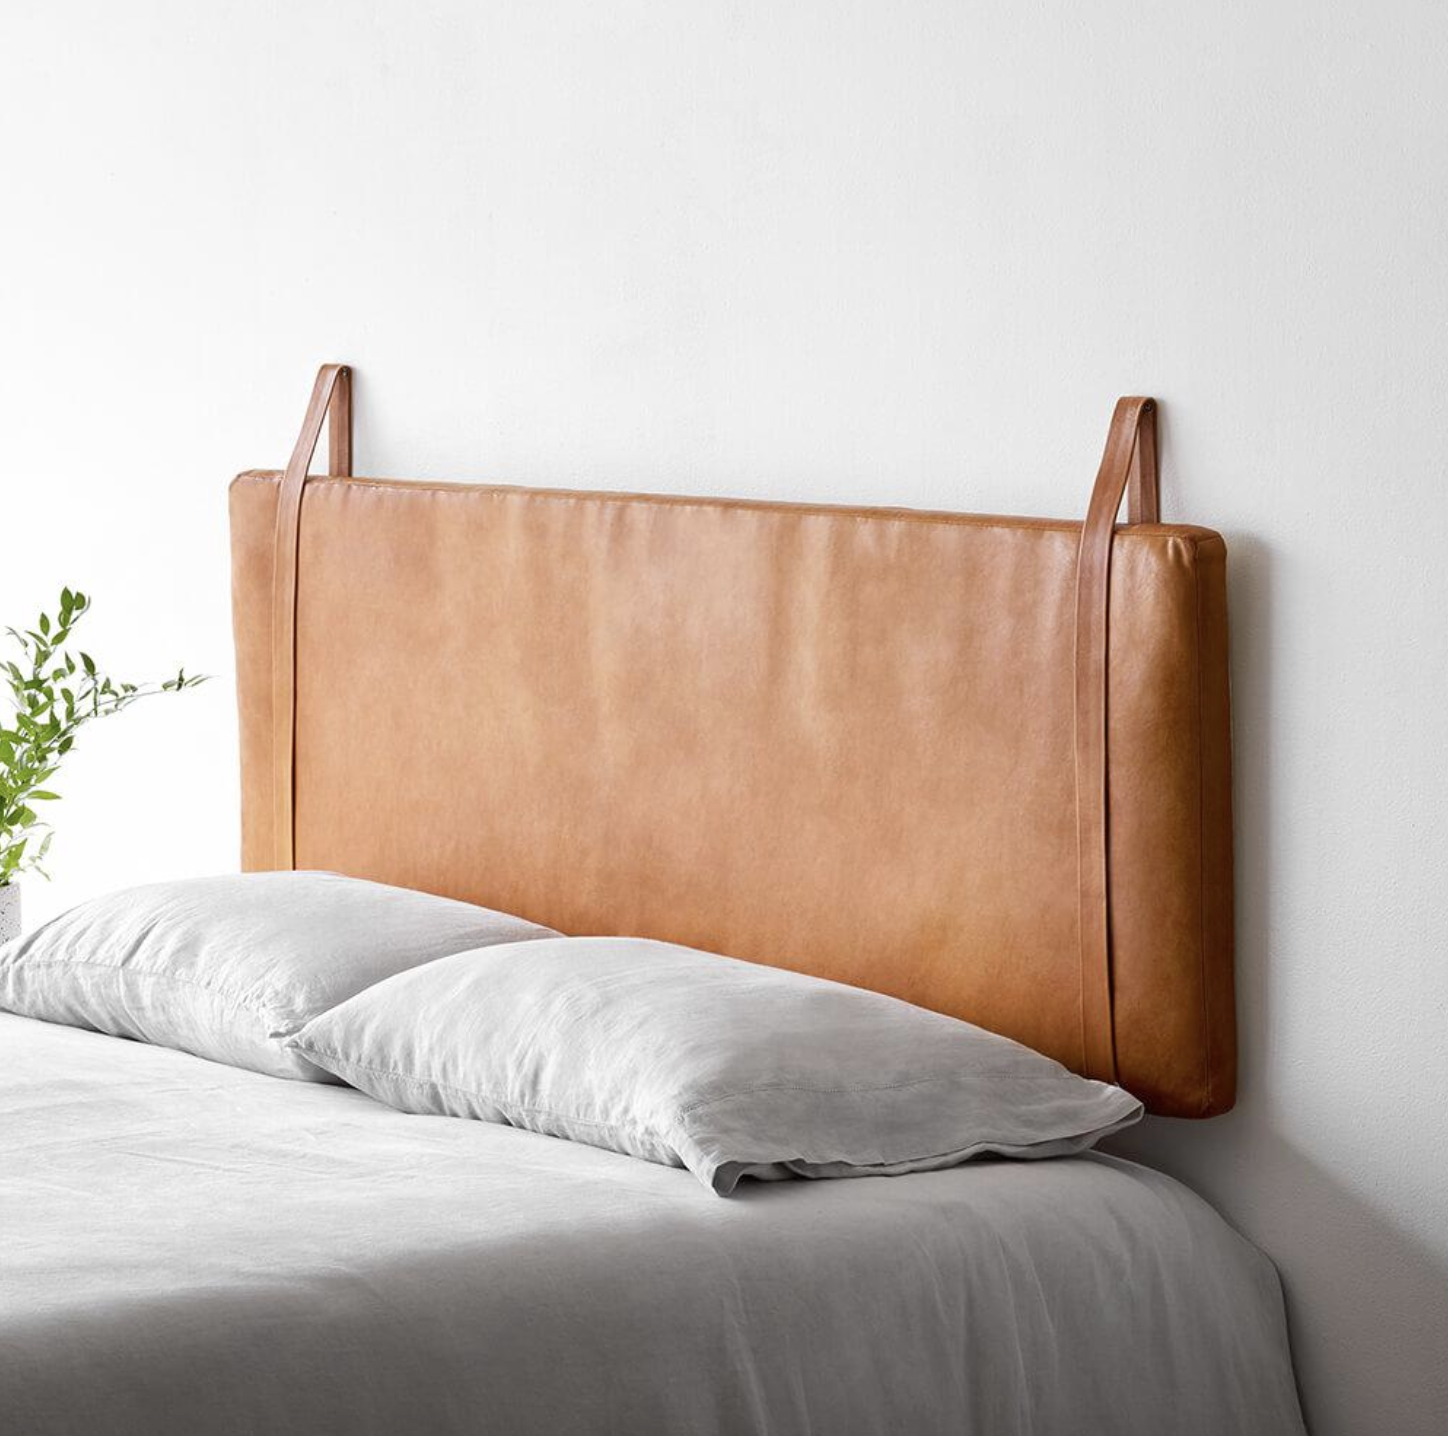 9 Wall Mounted Floating Headboards We, How To Attach Heavy Headboard Wall